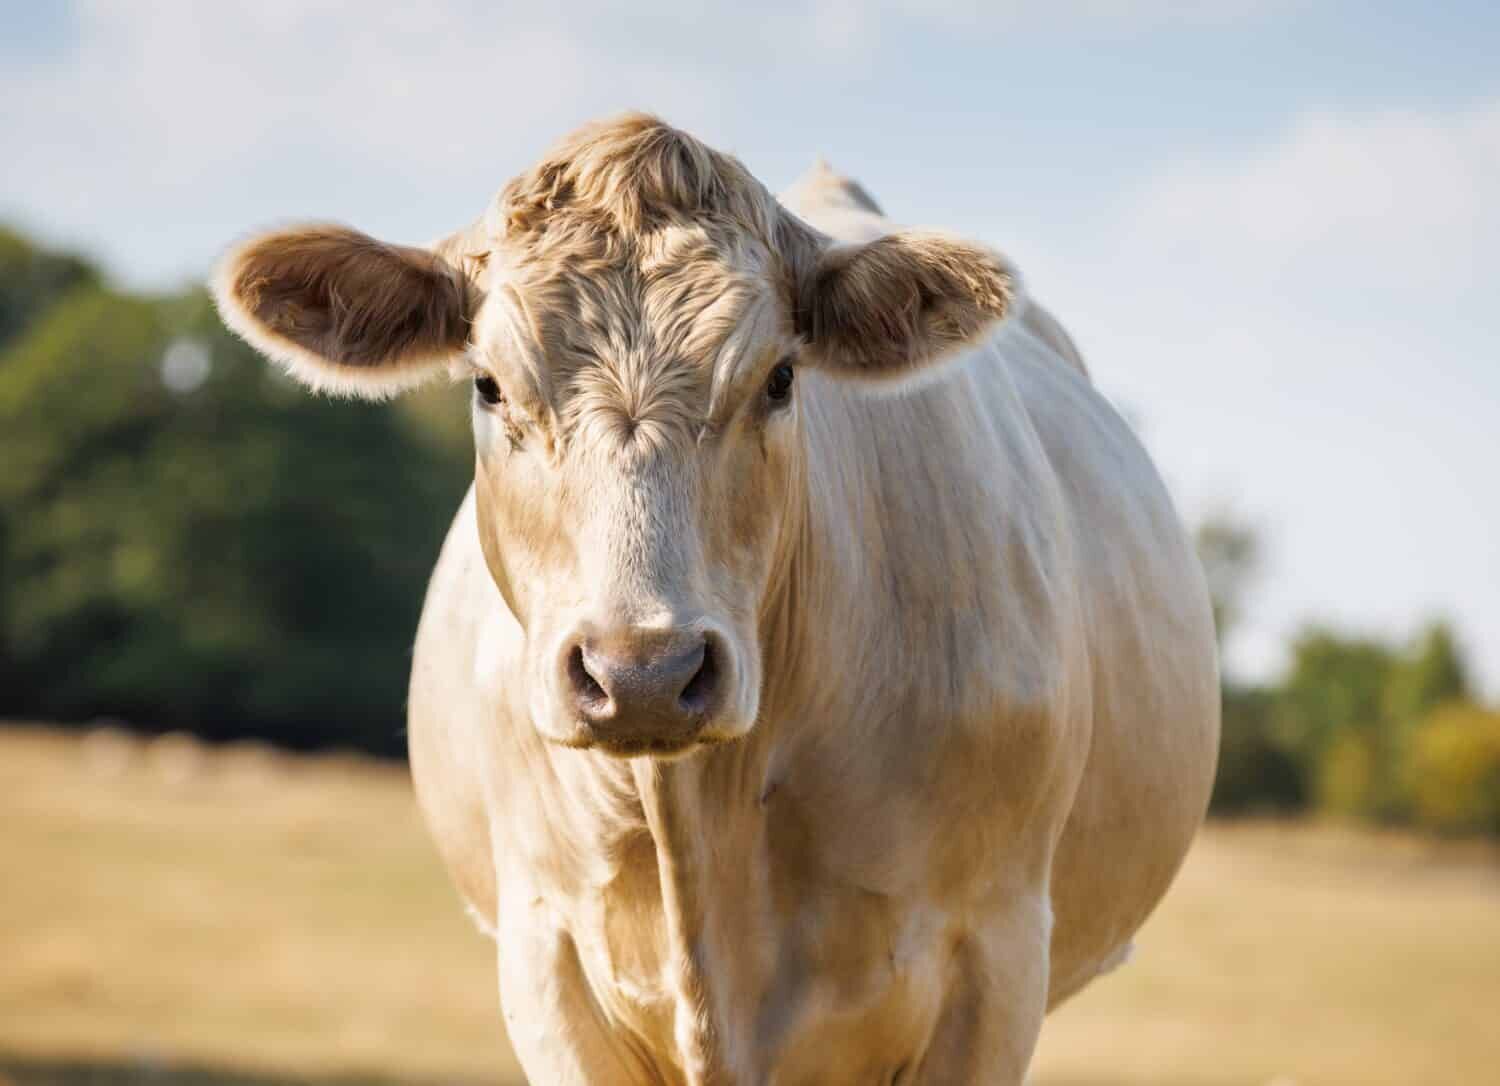 Charolais cows provide high-quality beef and they have a unique appearance.